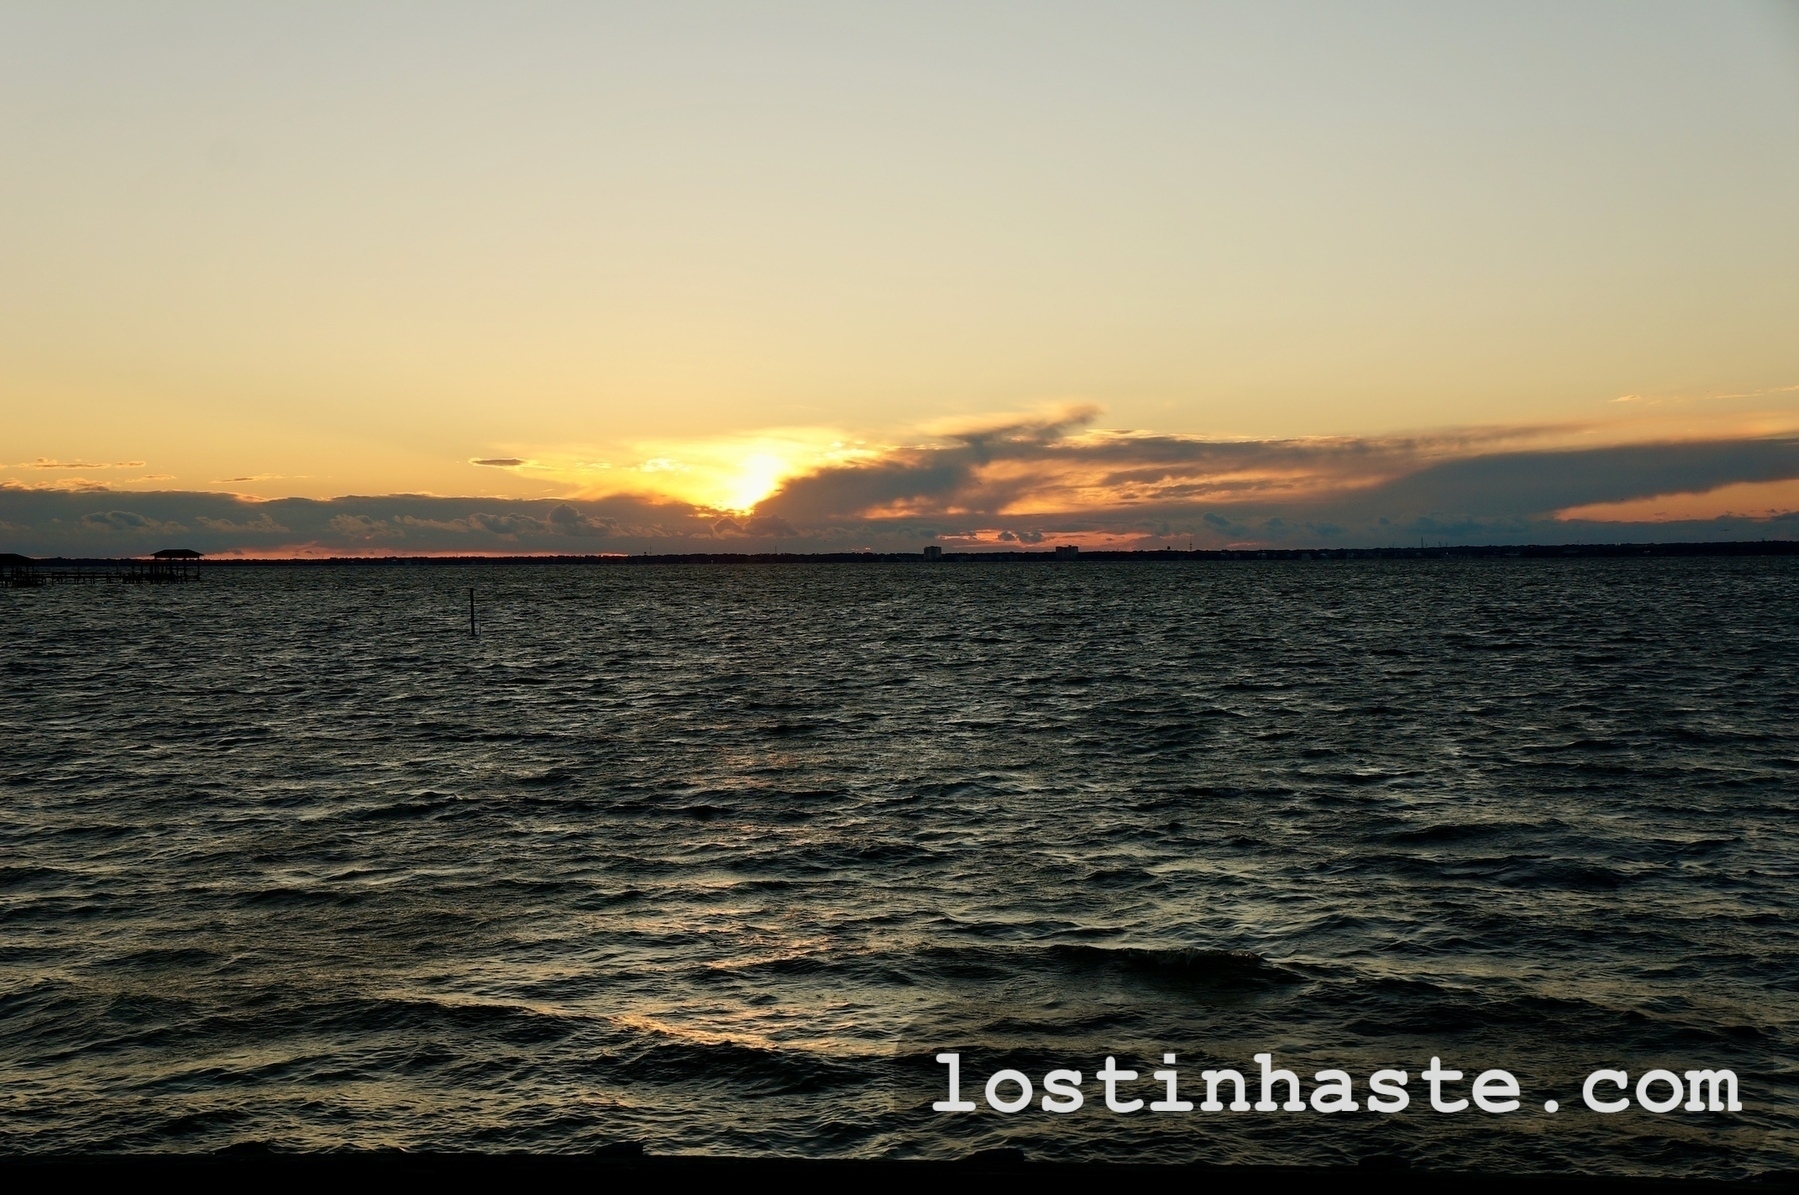 Sunset over choppy water with clouds partly obscuring the sun and darkening the skyline; the text reads 'lostininhaste.com.'